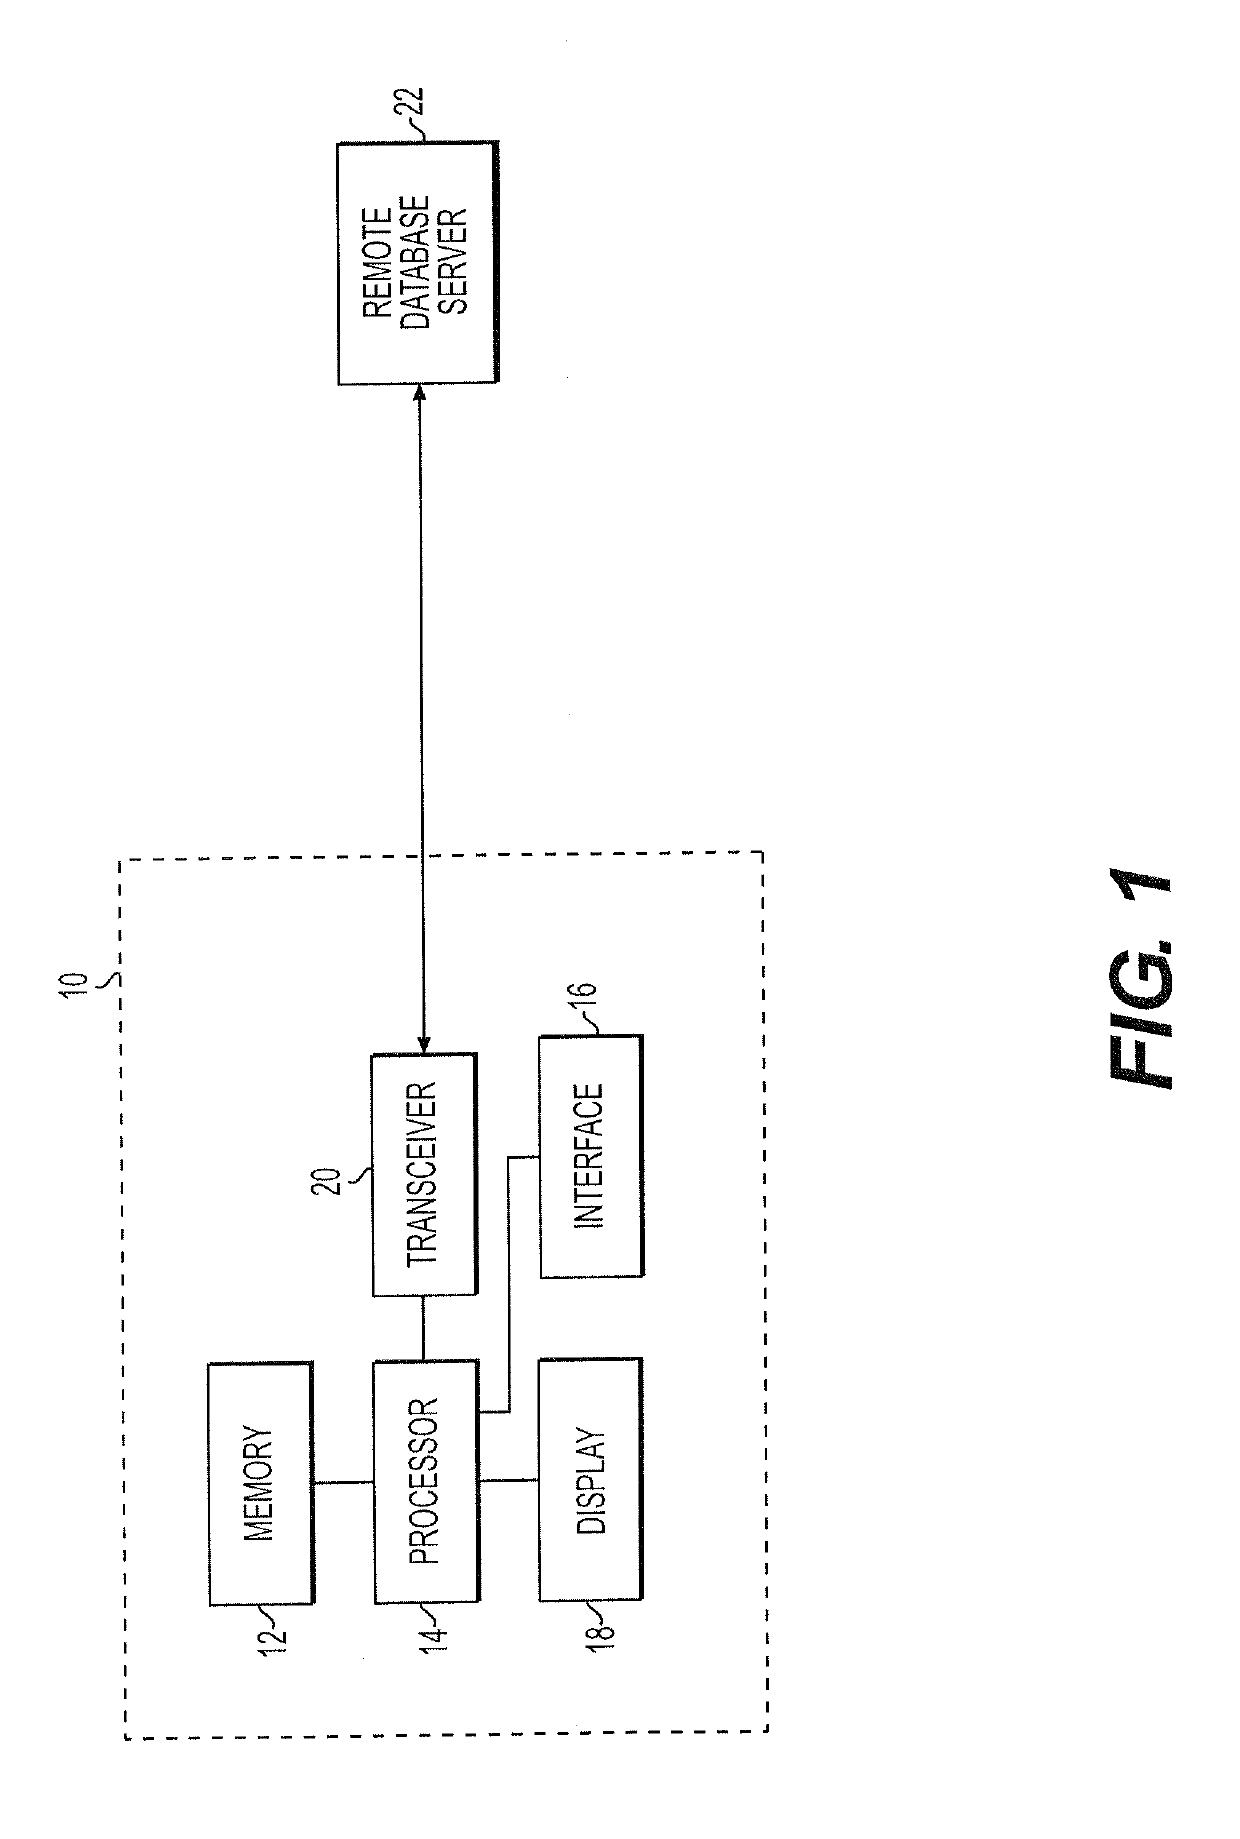 Method of facet-based searching of databases